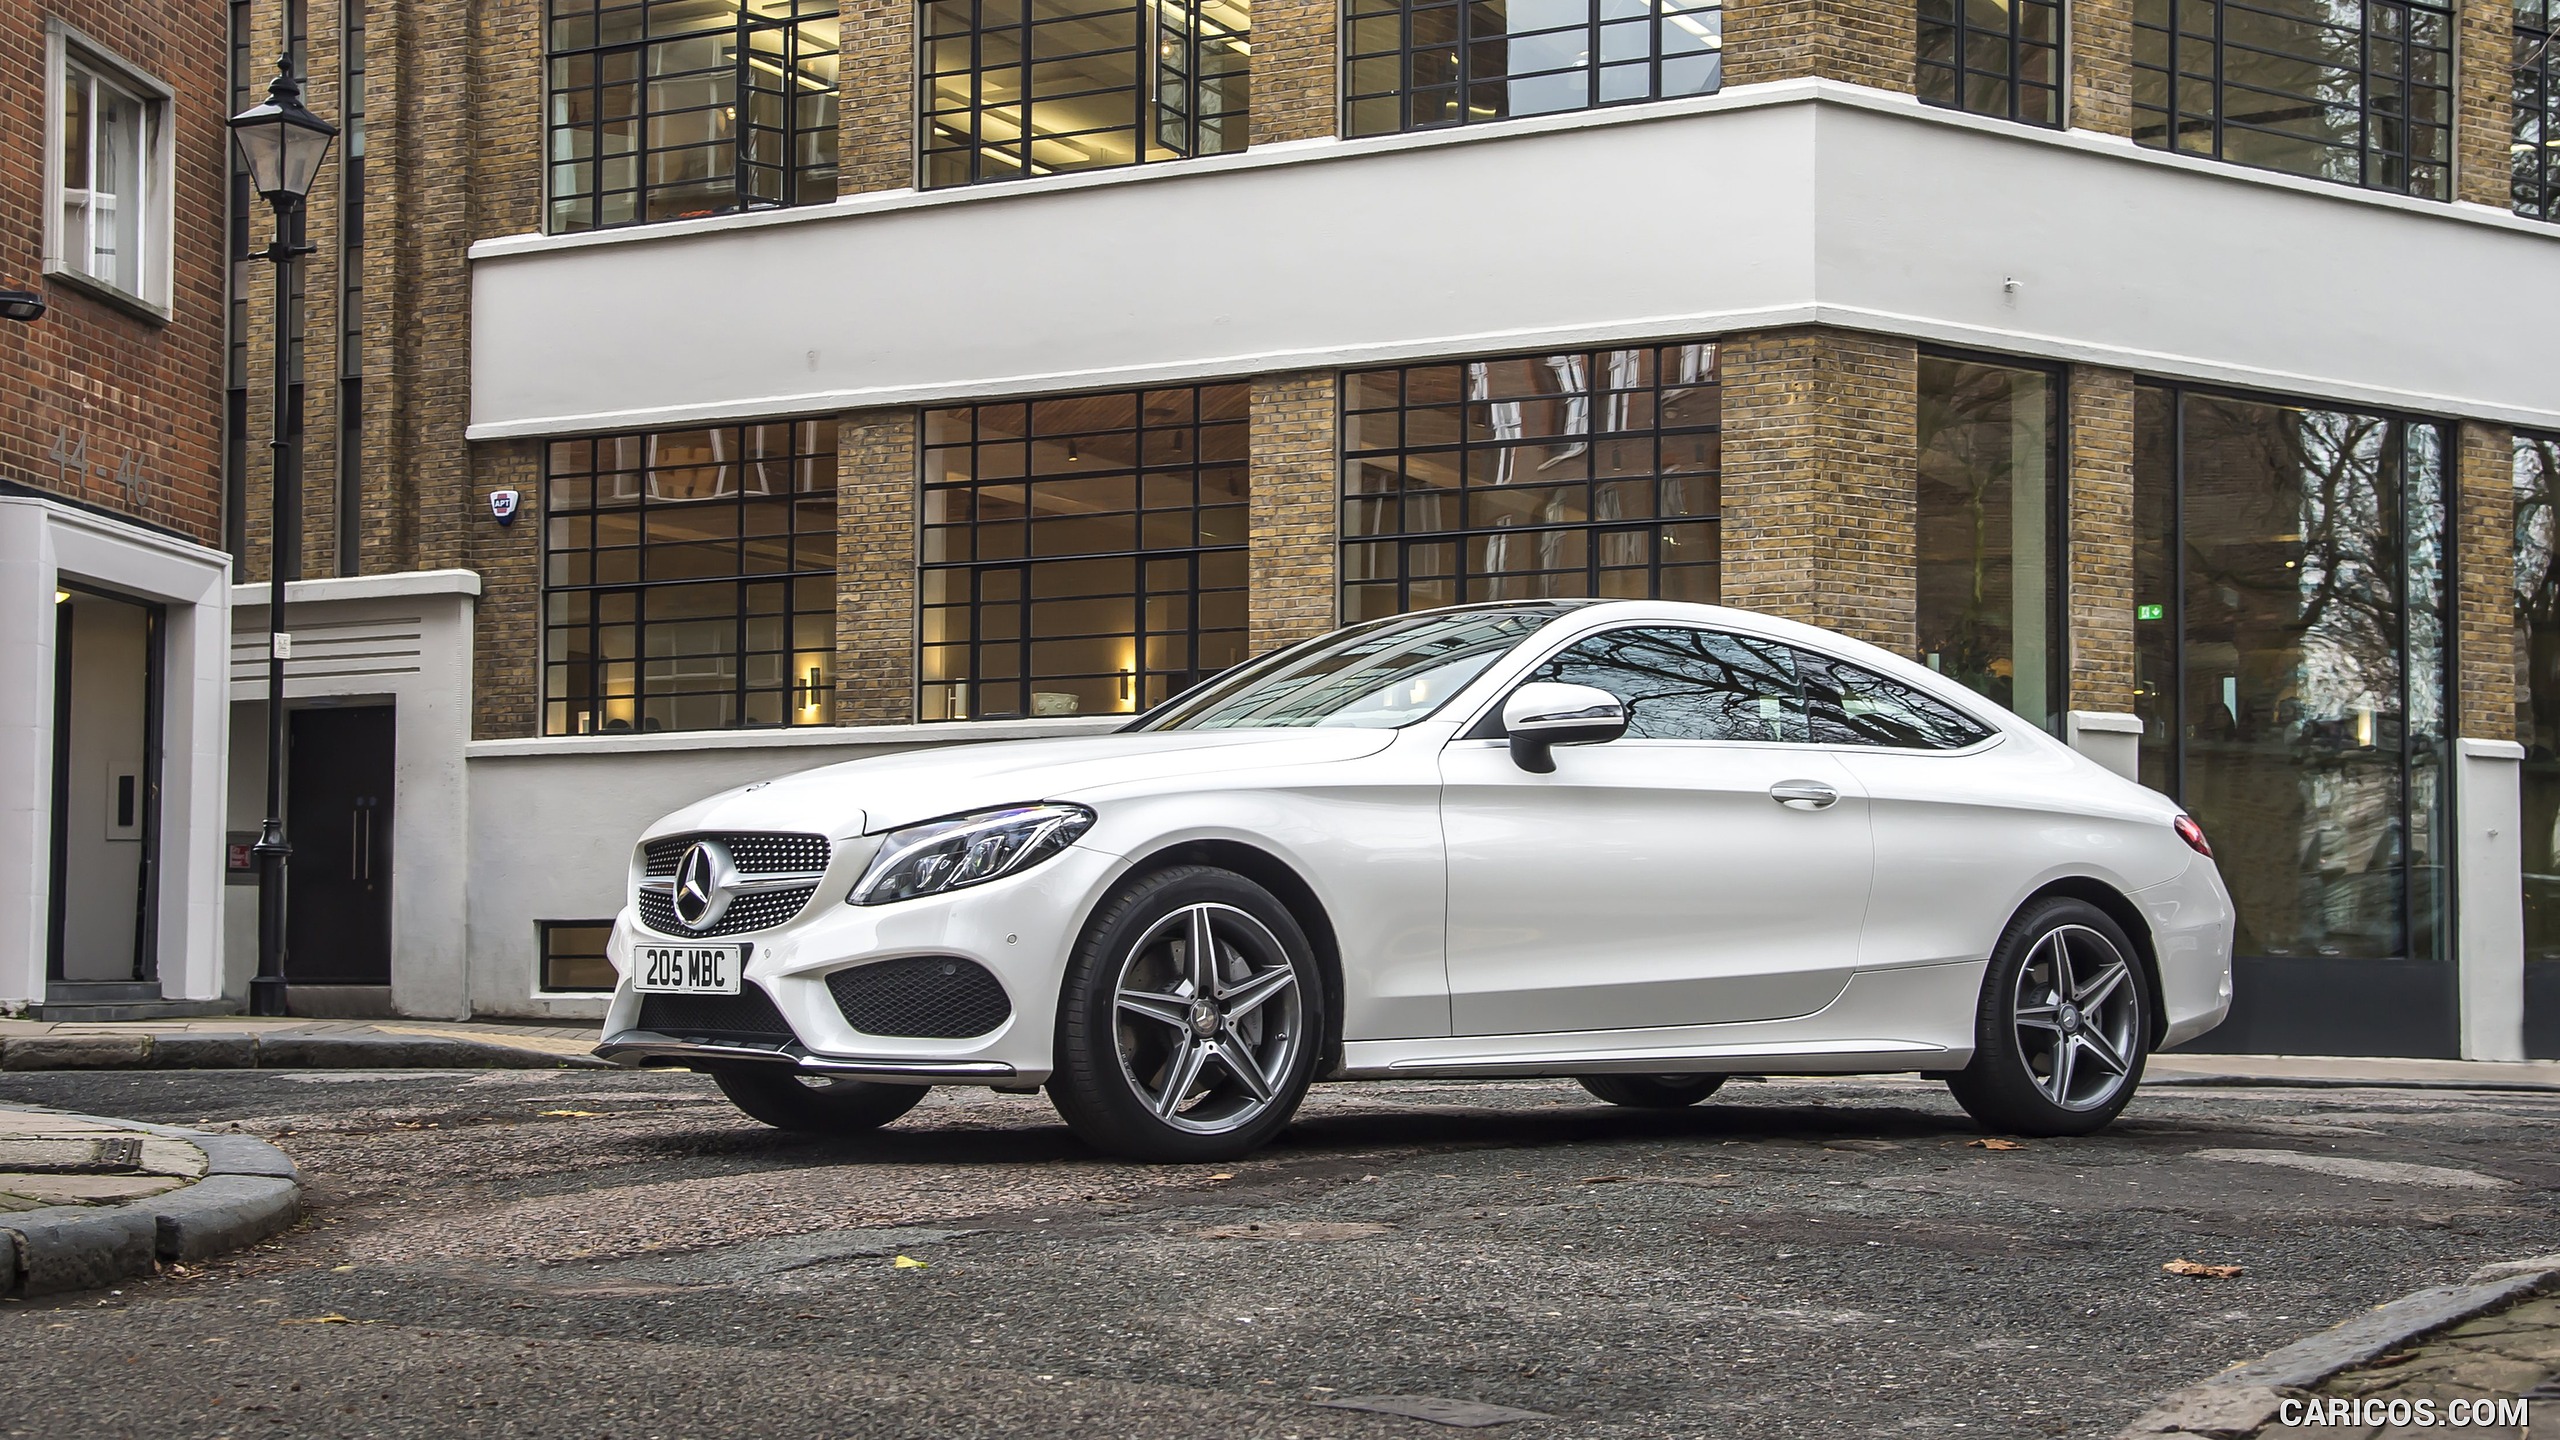 2017 Mercedes-Benz C-Class Coupe (UK-Spec) - Side, #95 of 210